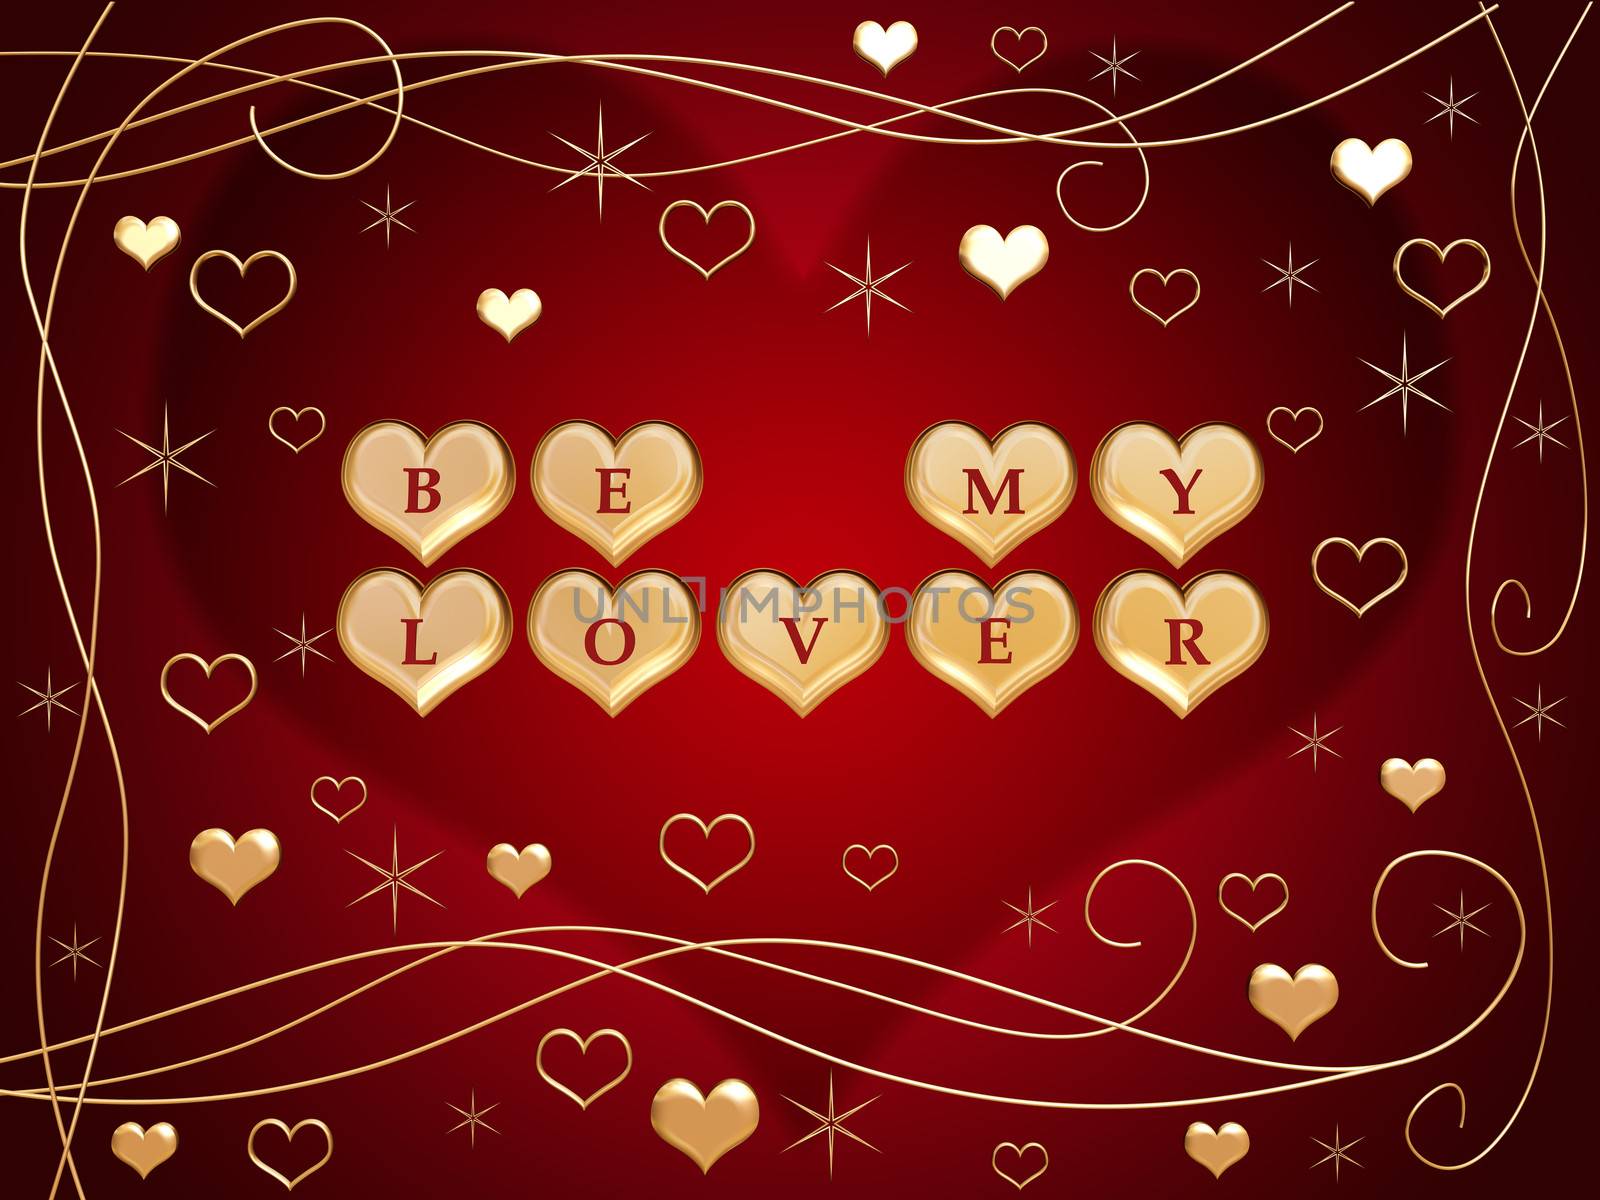 3d golden hearts, red letters, text - be my lover, flowers, stars